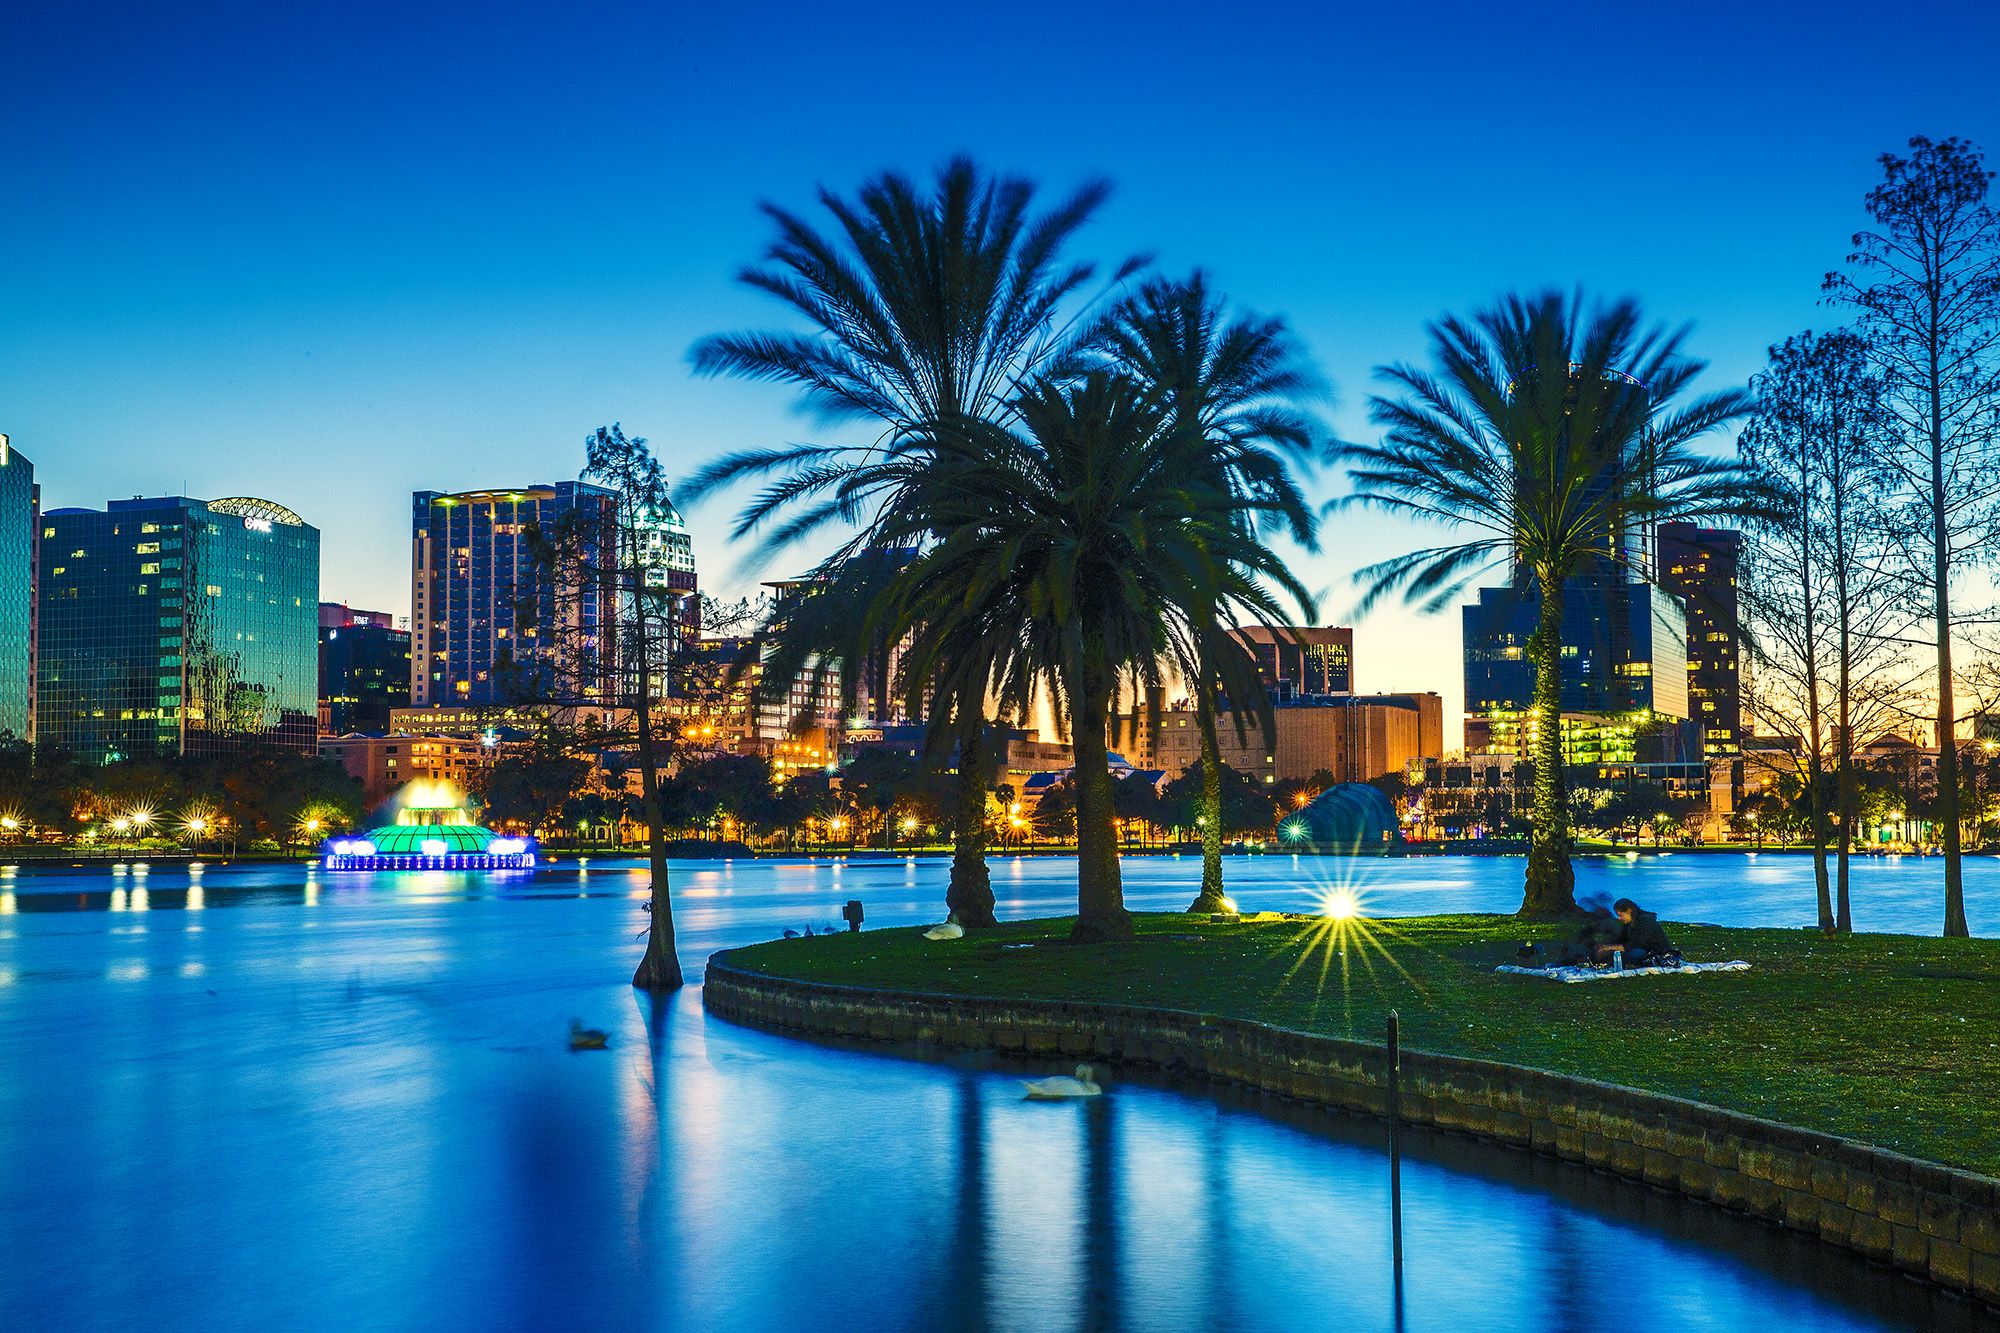 Orlando wallpapers, Man Made, HQ Orlando pictures.